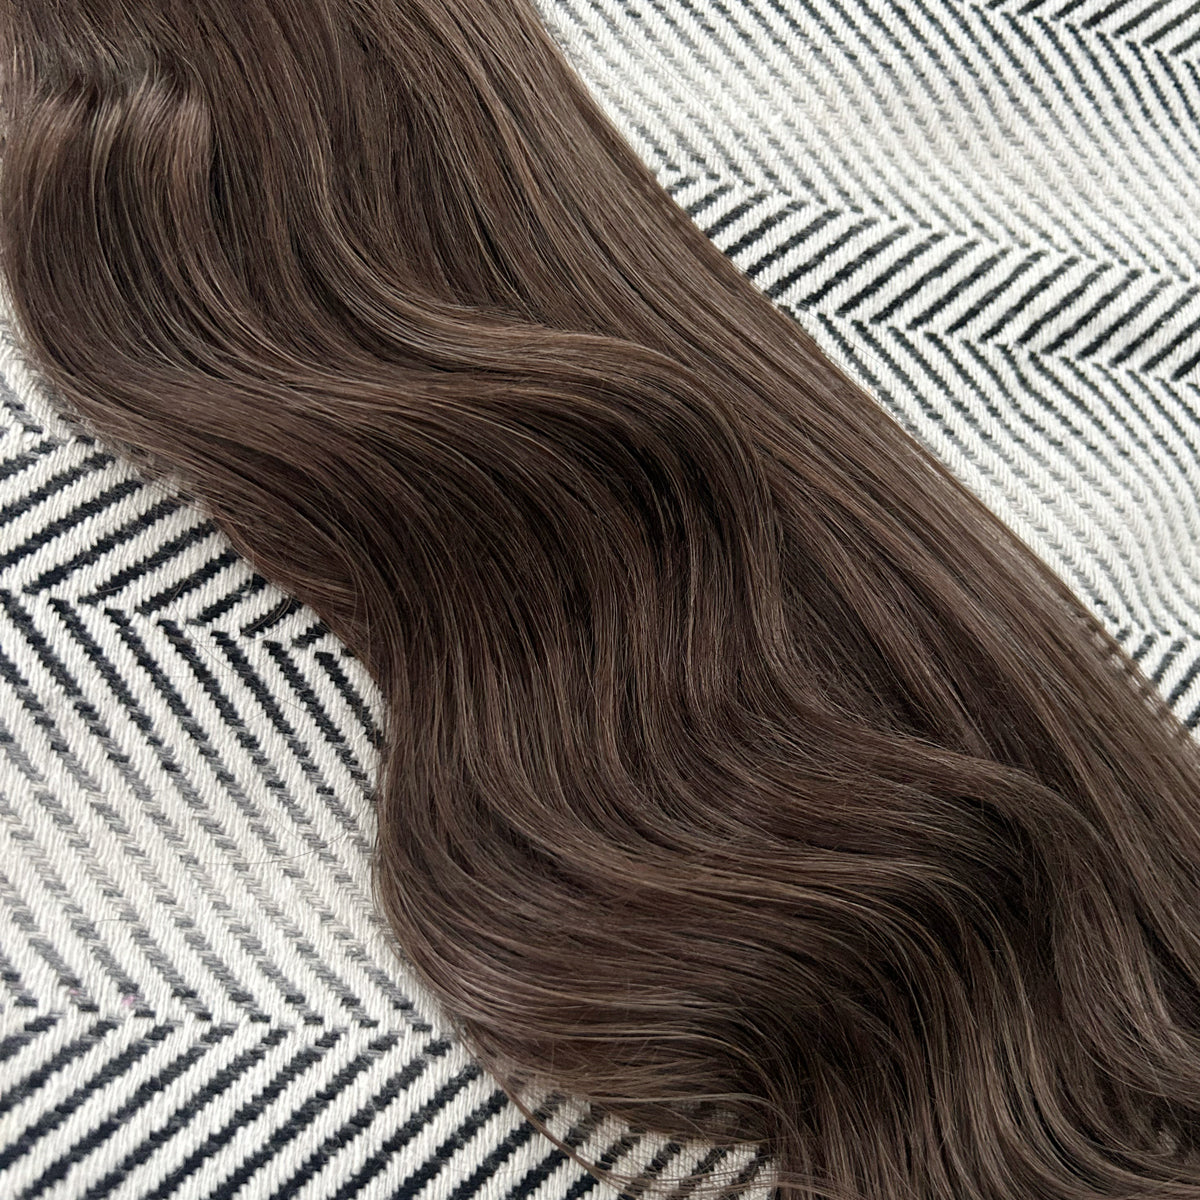 Flat Weft Hair Extensions #2c/8a Chocolate and Ash Brown Mix 22"